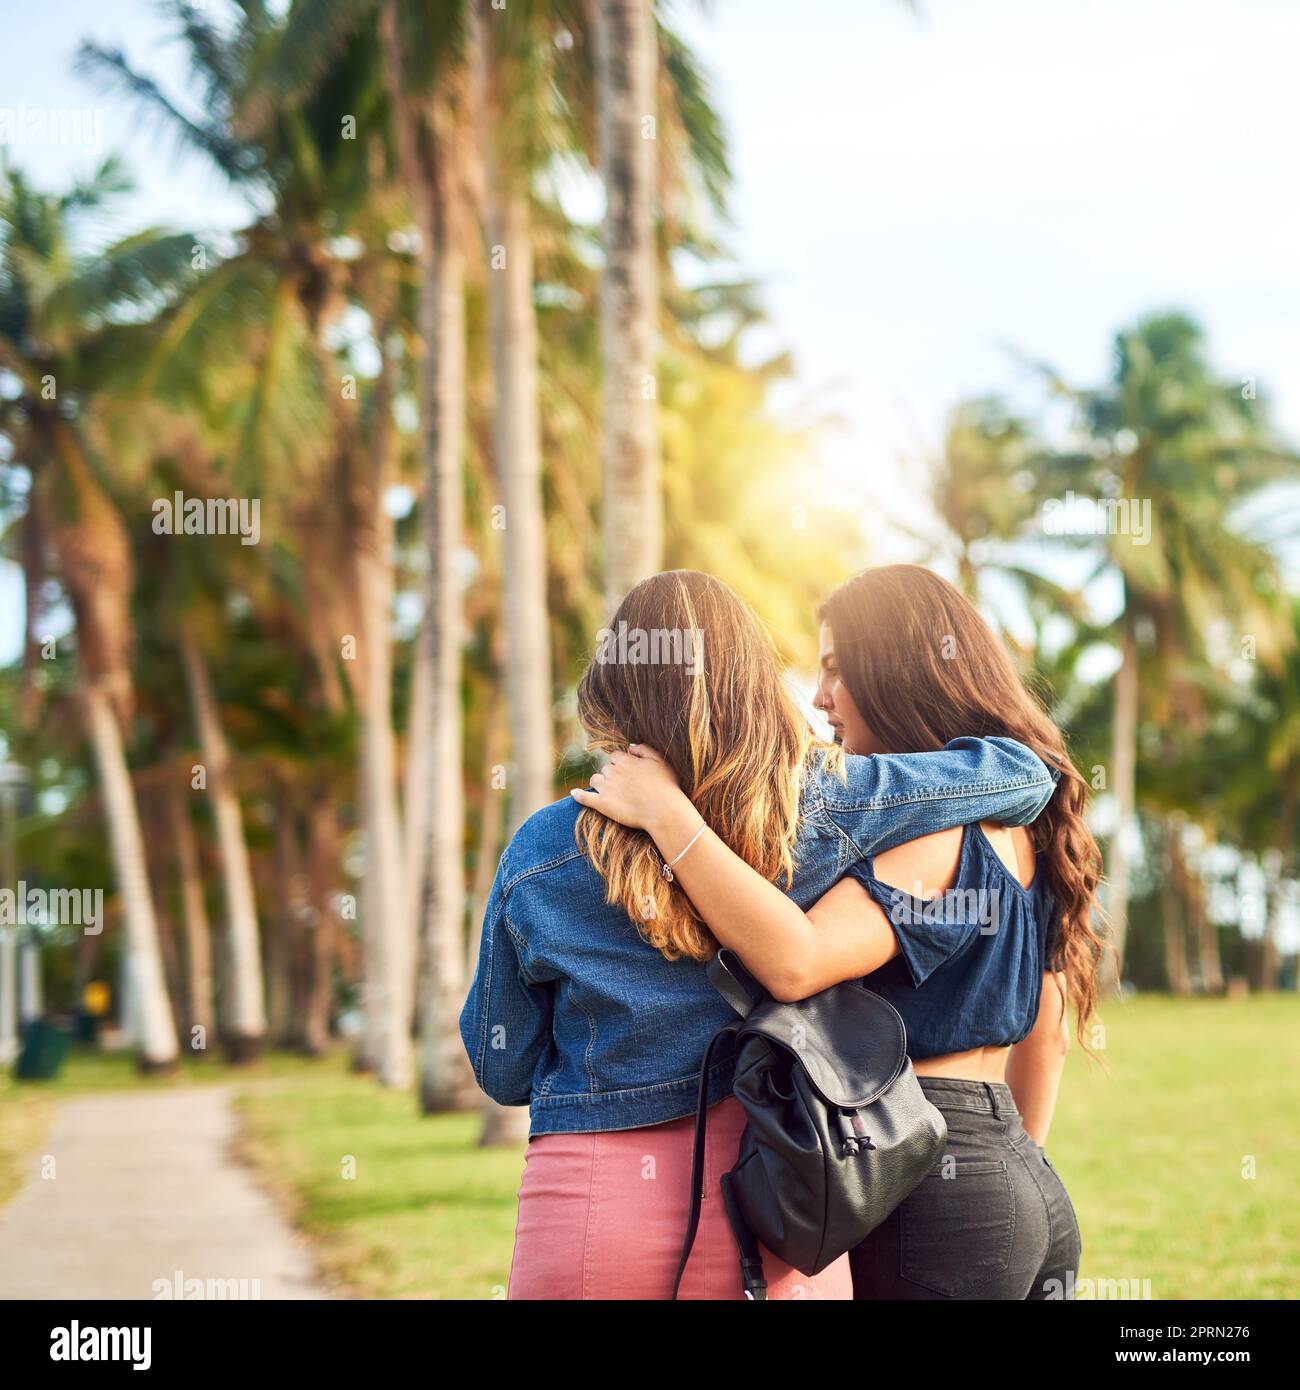 Off they go to wander together. Rearview shot of two unrecognizable female best friends hanging out in a public park Stock Photo